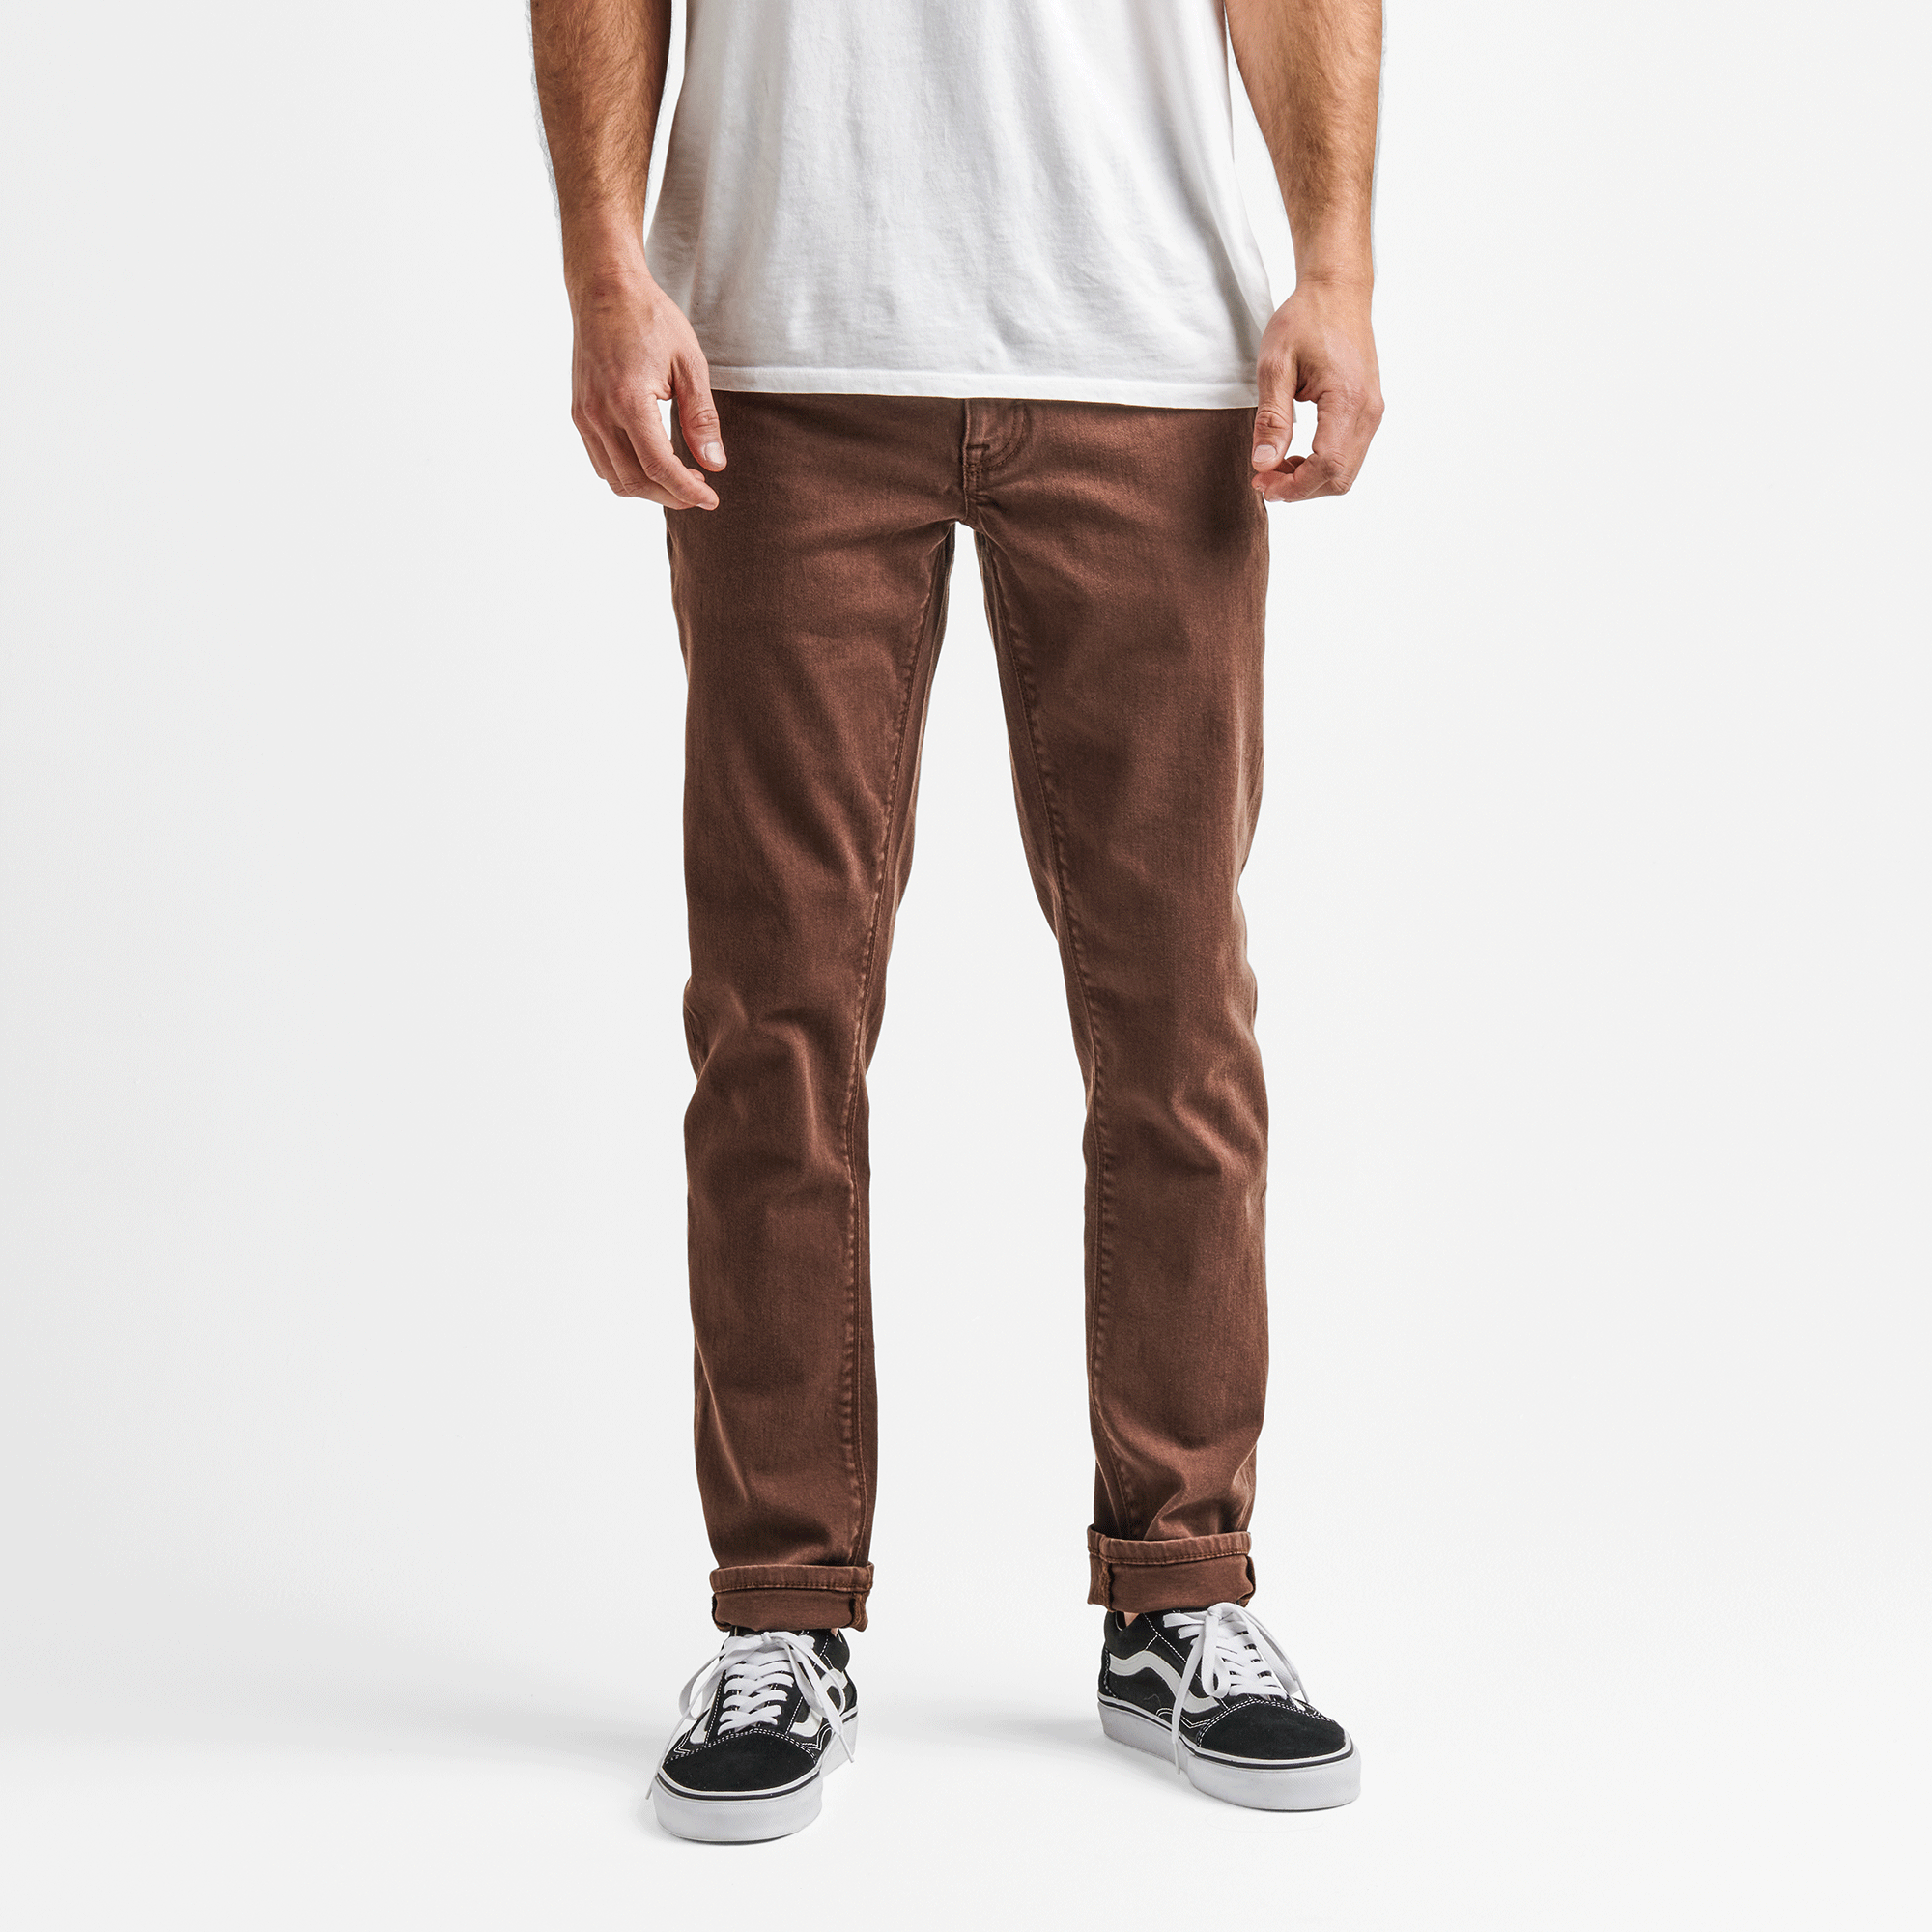 Pants: 90s -Levis 501 White Cone Denim- Mens as-new rosewood brown cotton  denim levis 501 straight leg denim jeans pants with button fly closure.  Five pocket style - front scoop pockets with